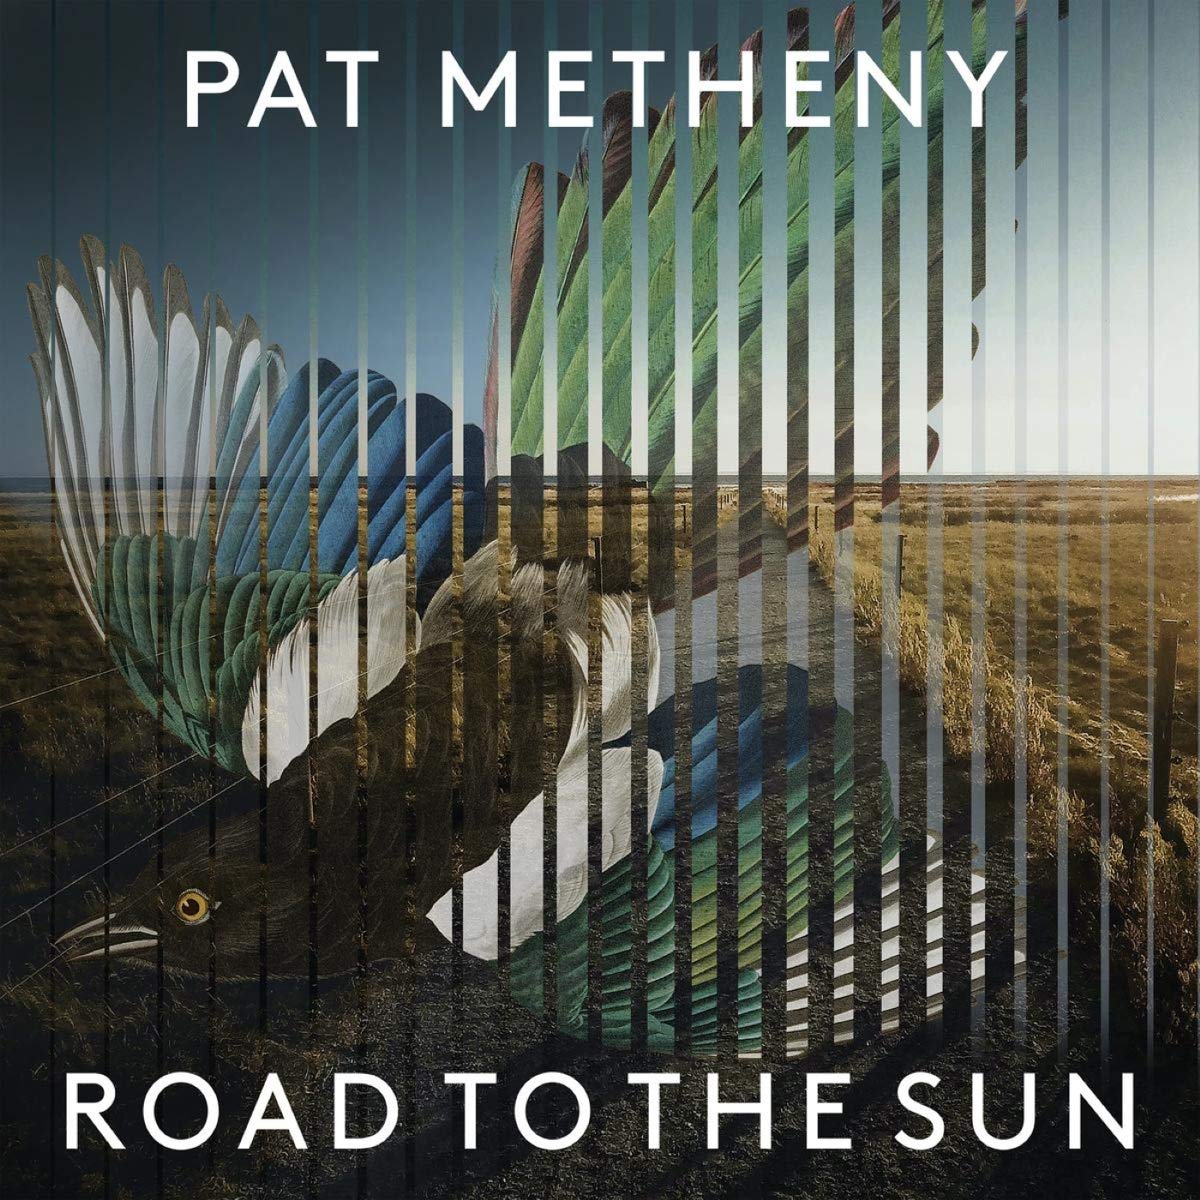 Road to the sun / Pat Metheny | 